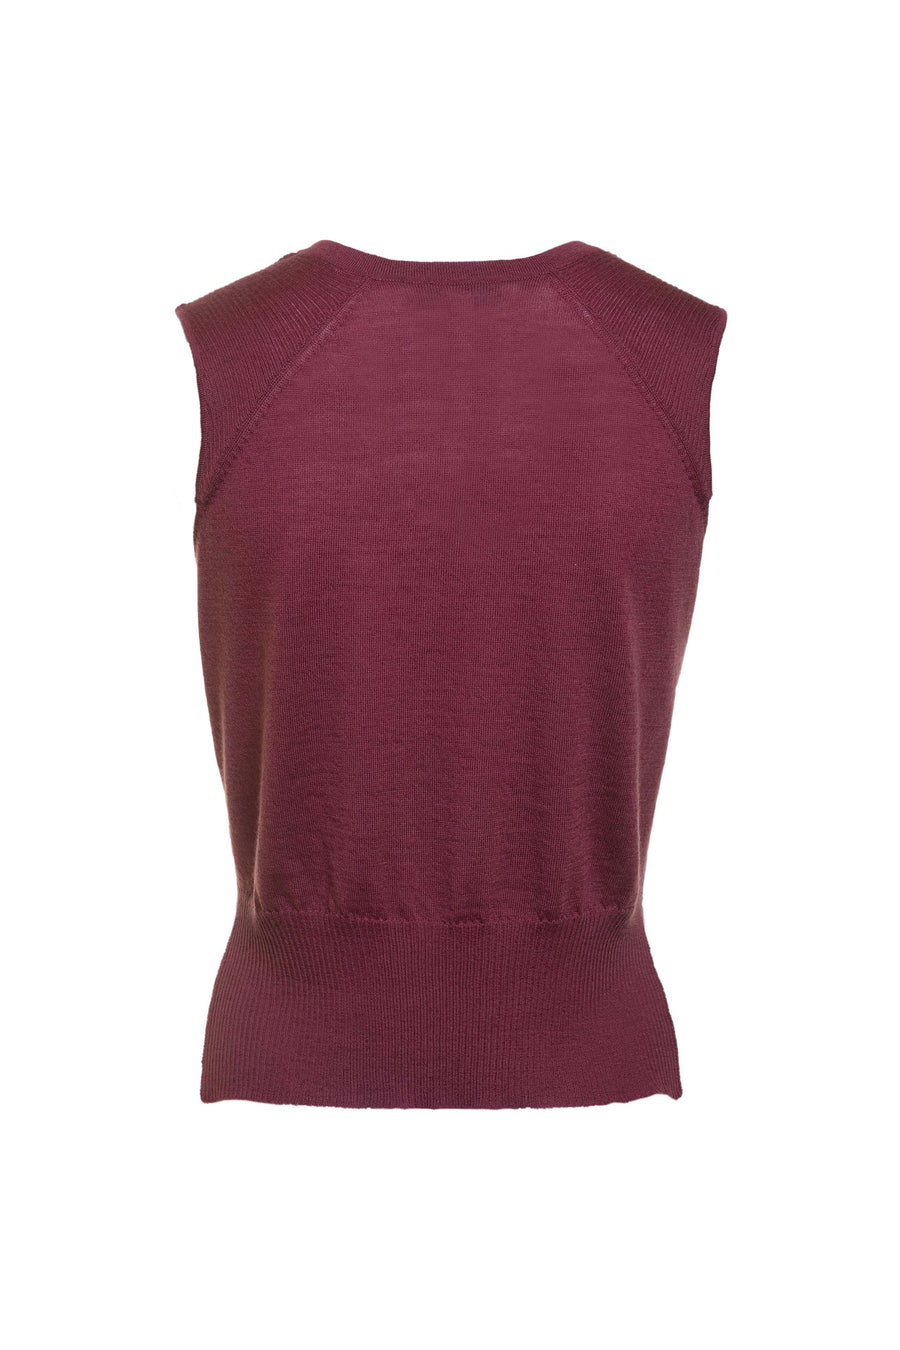 Cashmere Sleeveless Formal Top